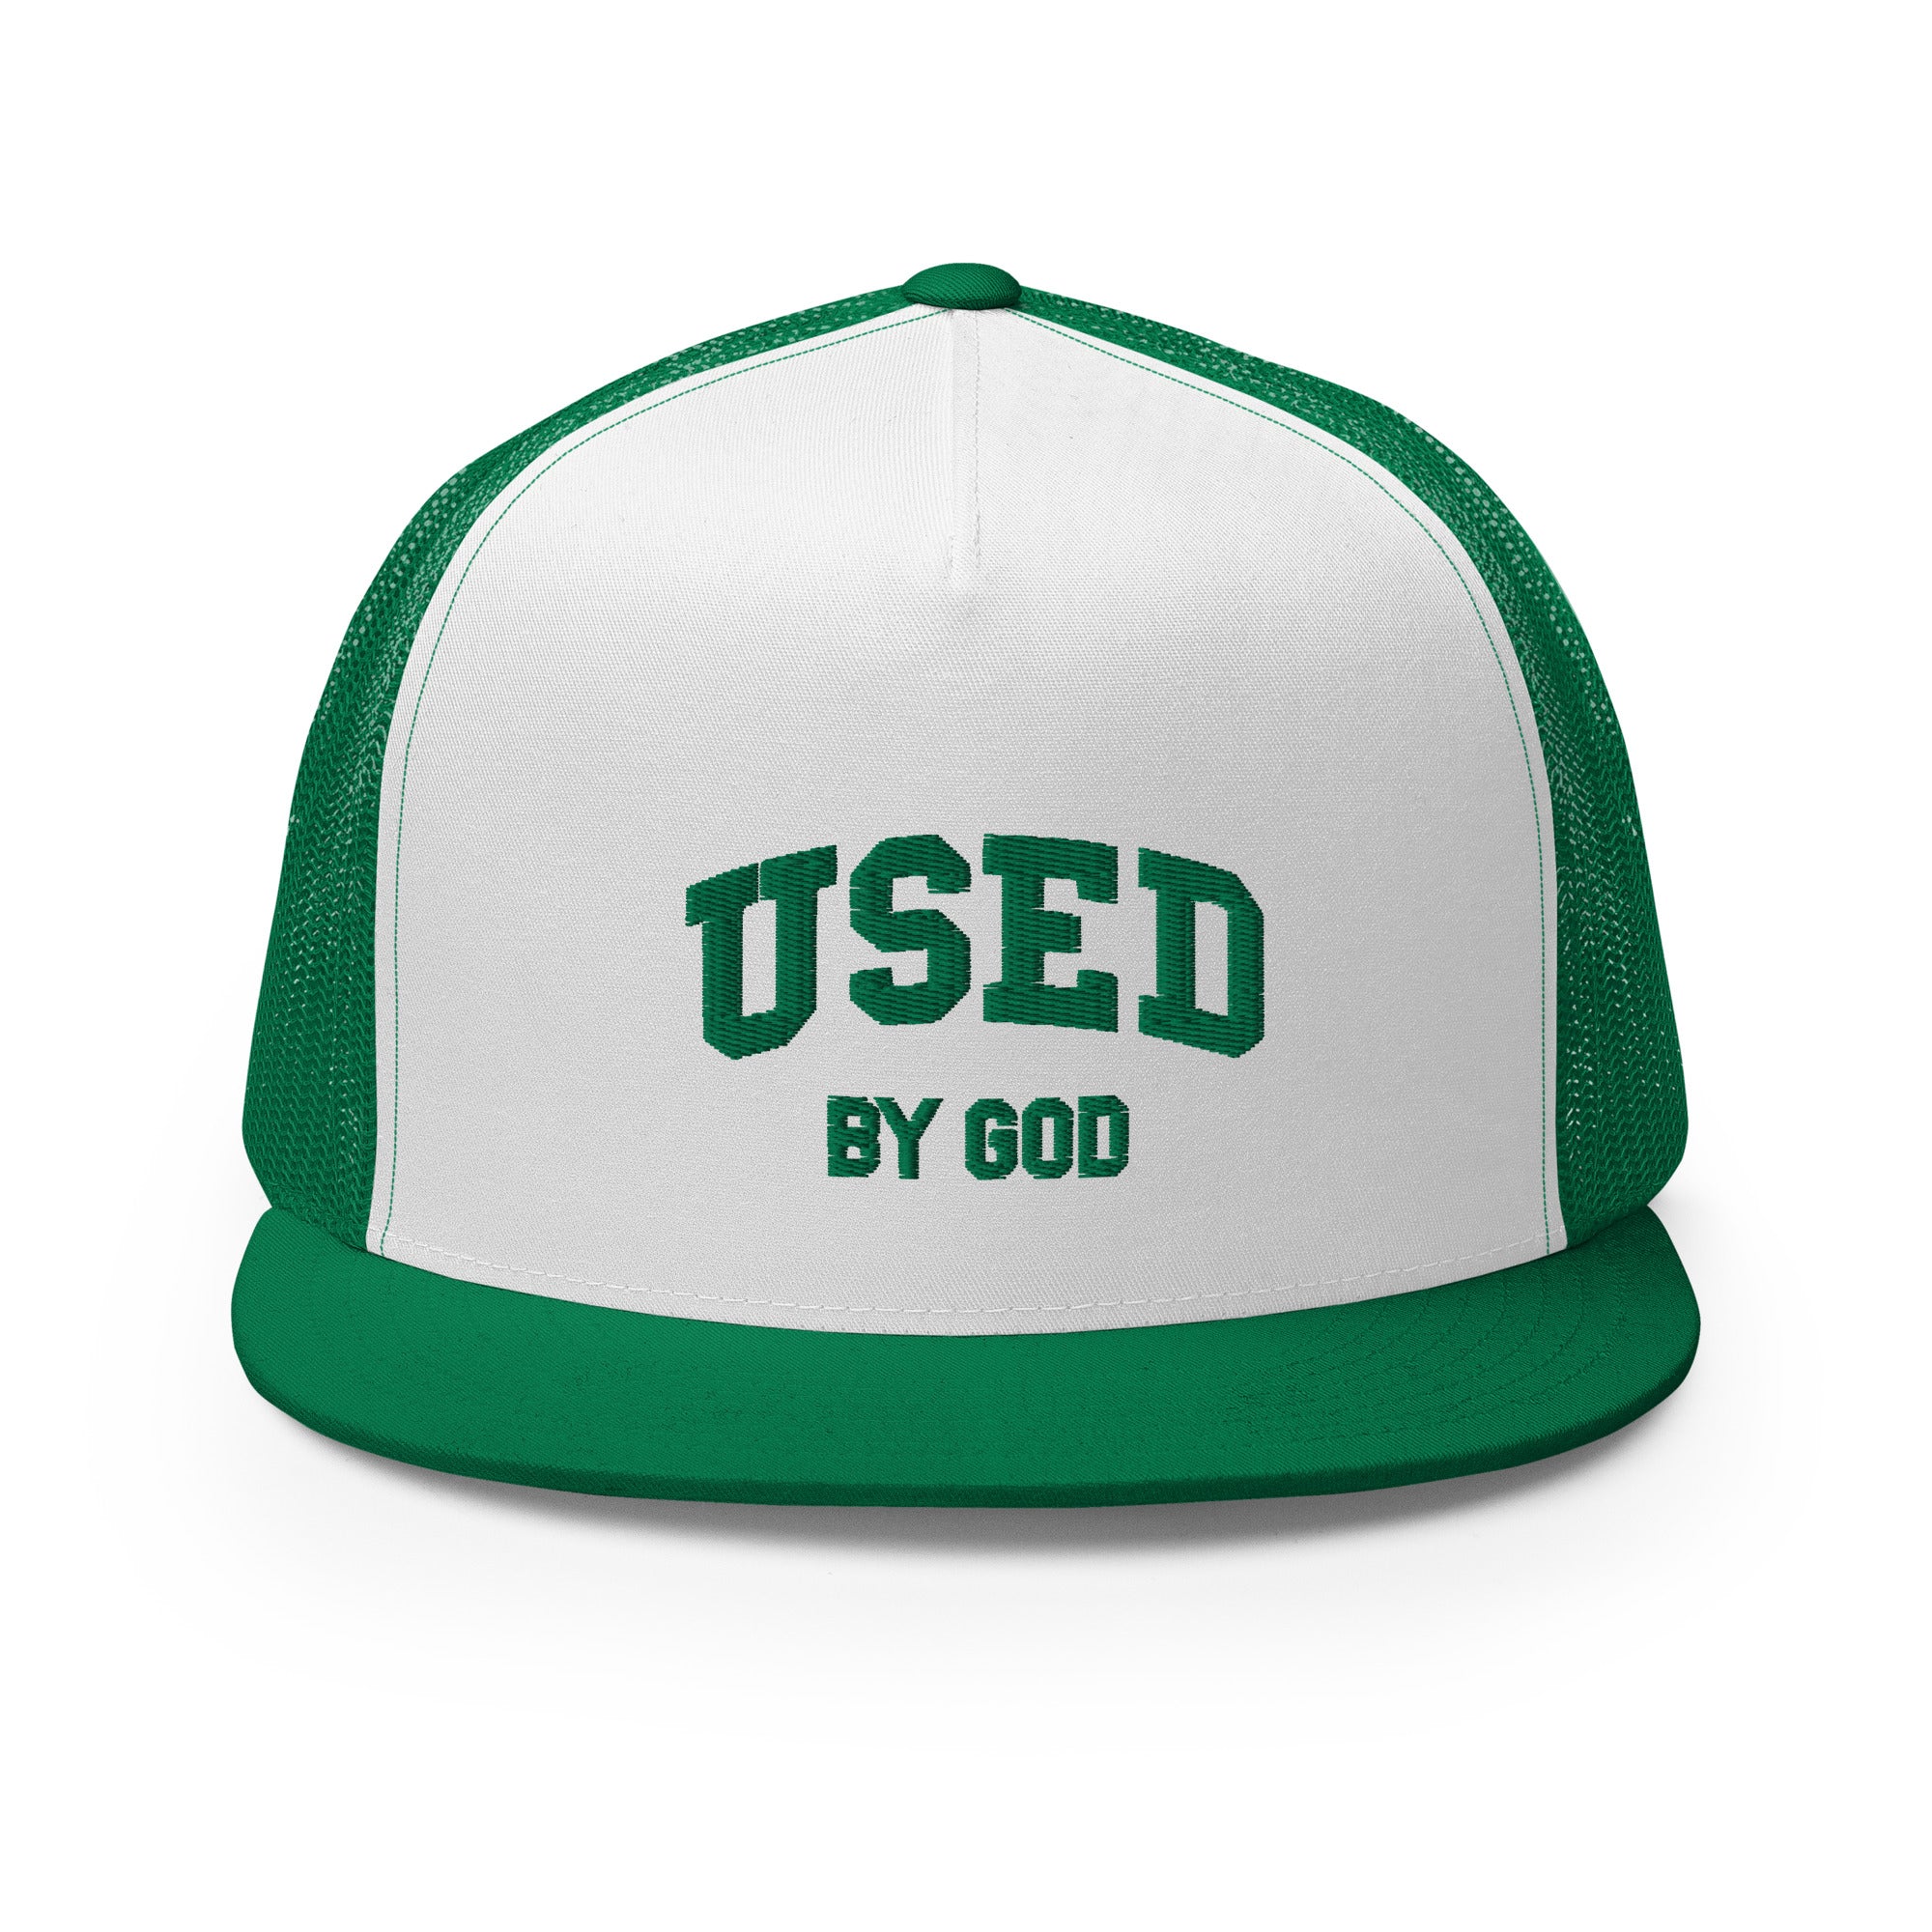 UBG Leaf Trucker Cap, Used By God, Used By God Clothing, Christian Apparel, Christian Hats, Christian T-Shirts, Christian Clothing, God Shirts, Christian Sweatshirts, God Clothing, Jesus Hoodie, Jesus Clothes, God Is Dope, Art Of Homage, Red Letter Clothing, Elevated Faith, Active Faith Sports, Beacon Threads, God The Father Apparel